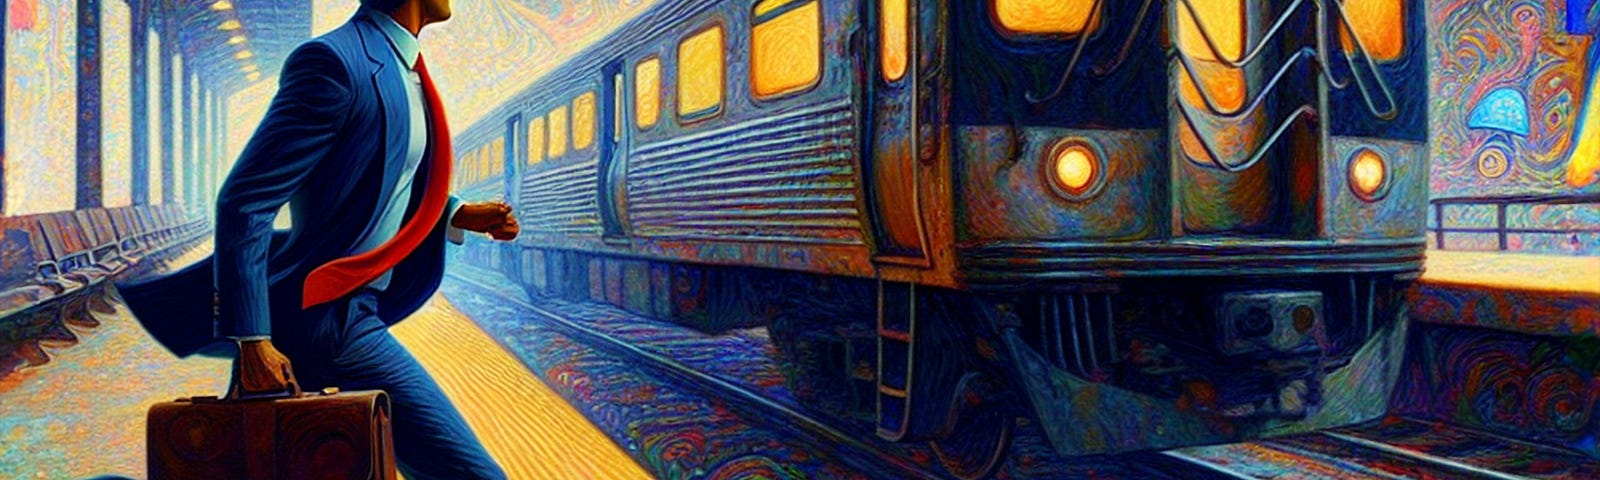 A man in a suit and tie with a briefcase running across a train station track with a train pulling in, generated using a psychedelic filter.